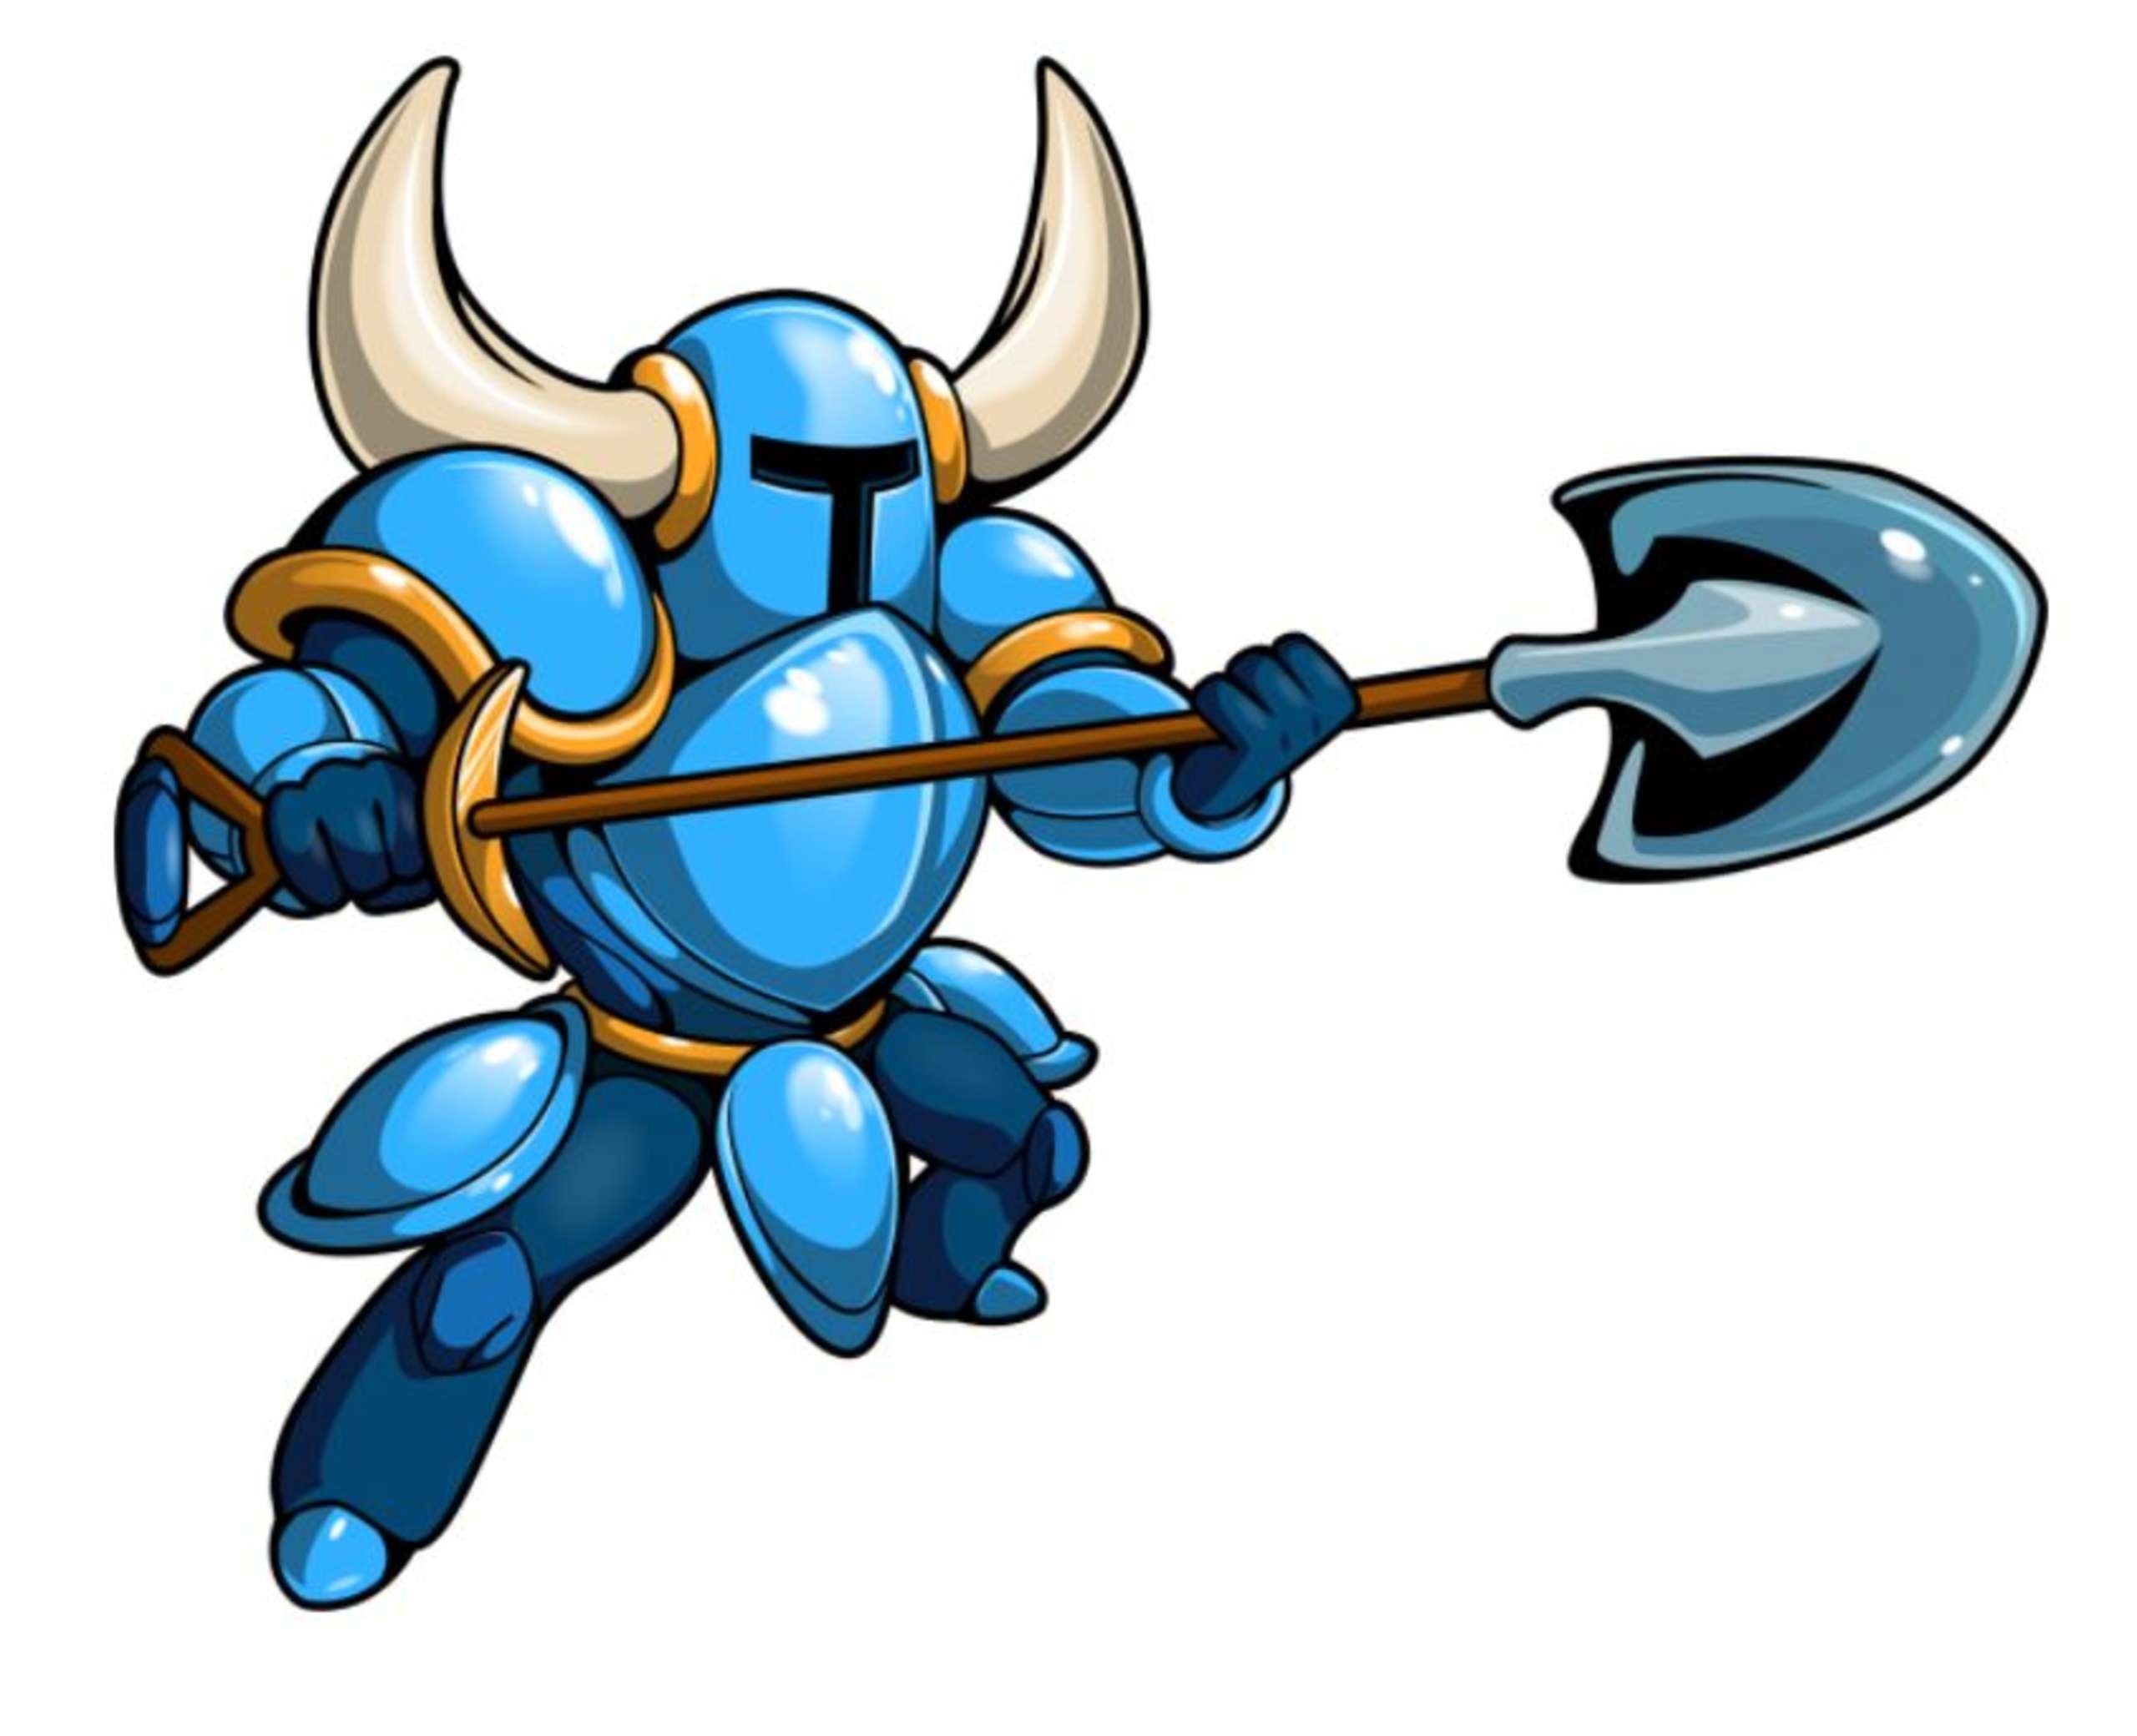 A Surprising Explanation For The Almost 30 Cameo Appearances Of Shovel Knight In Games That Aren’t Part Of The Shovel Knight Canon Has Been Supplied By Yacht Club